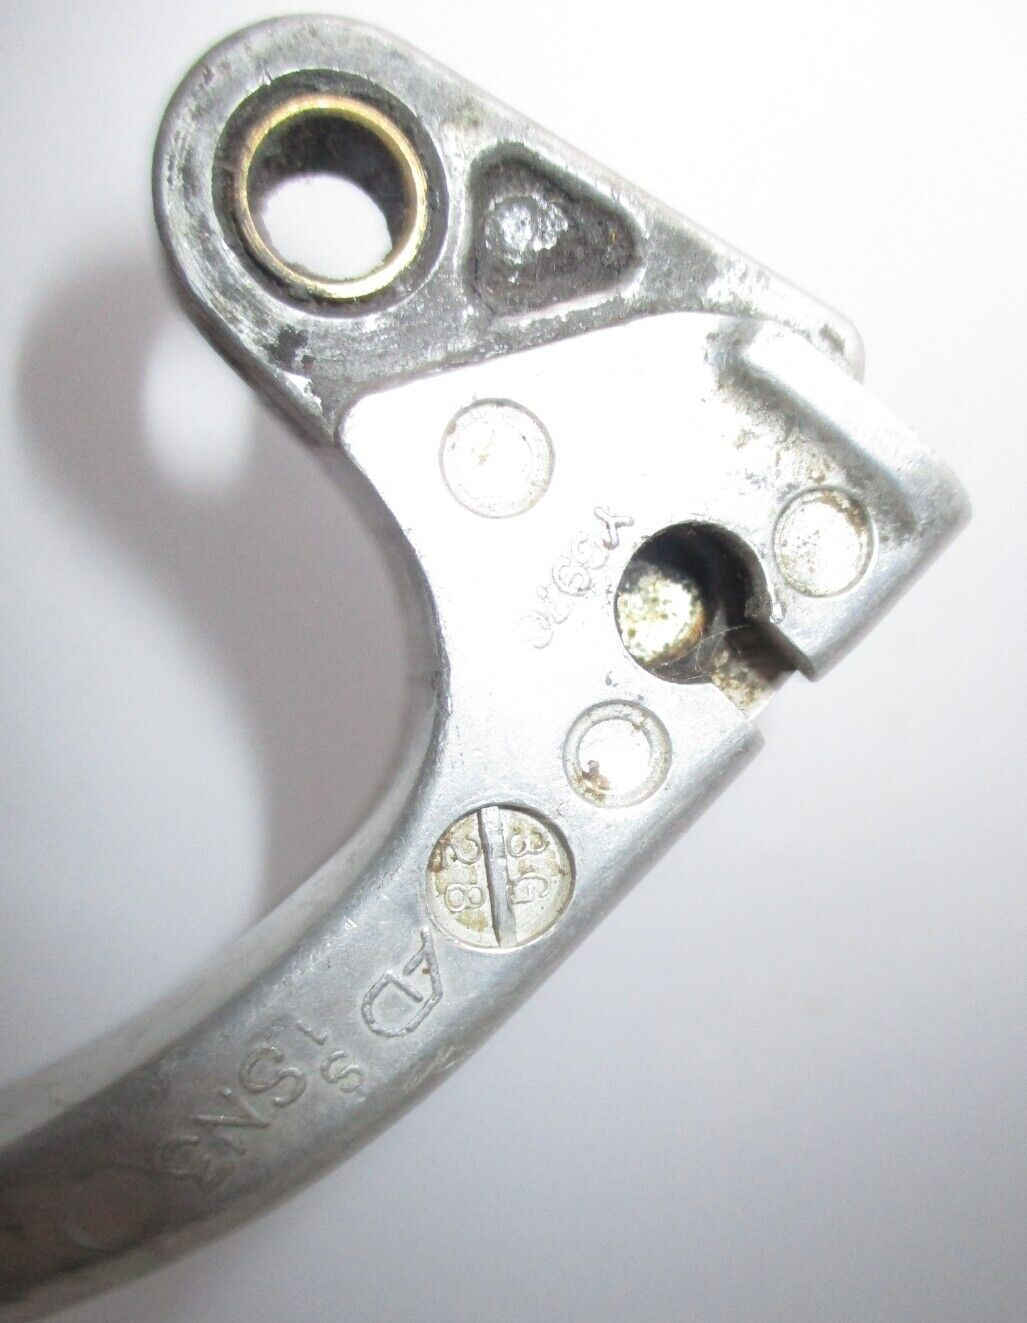 Clutch Lever  Unknown Fitment Marked SN3